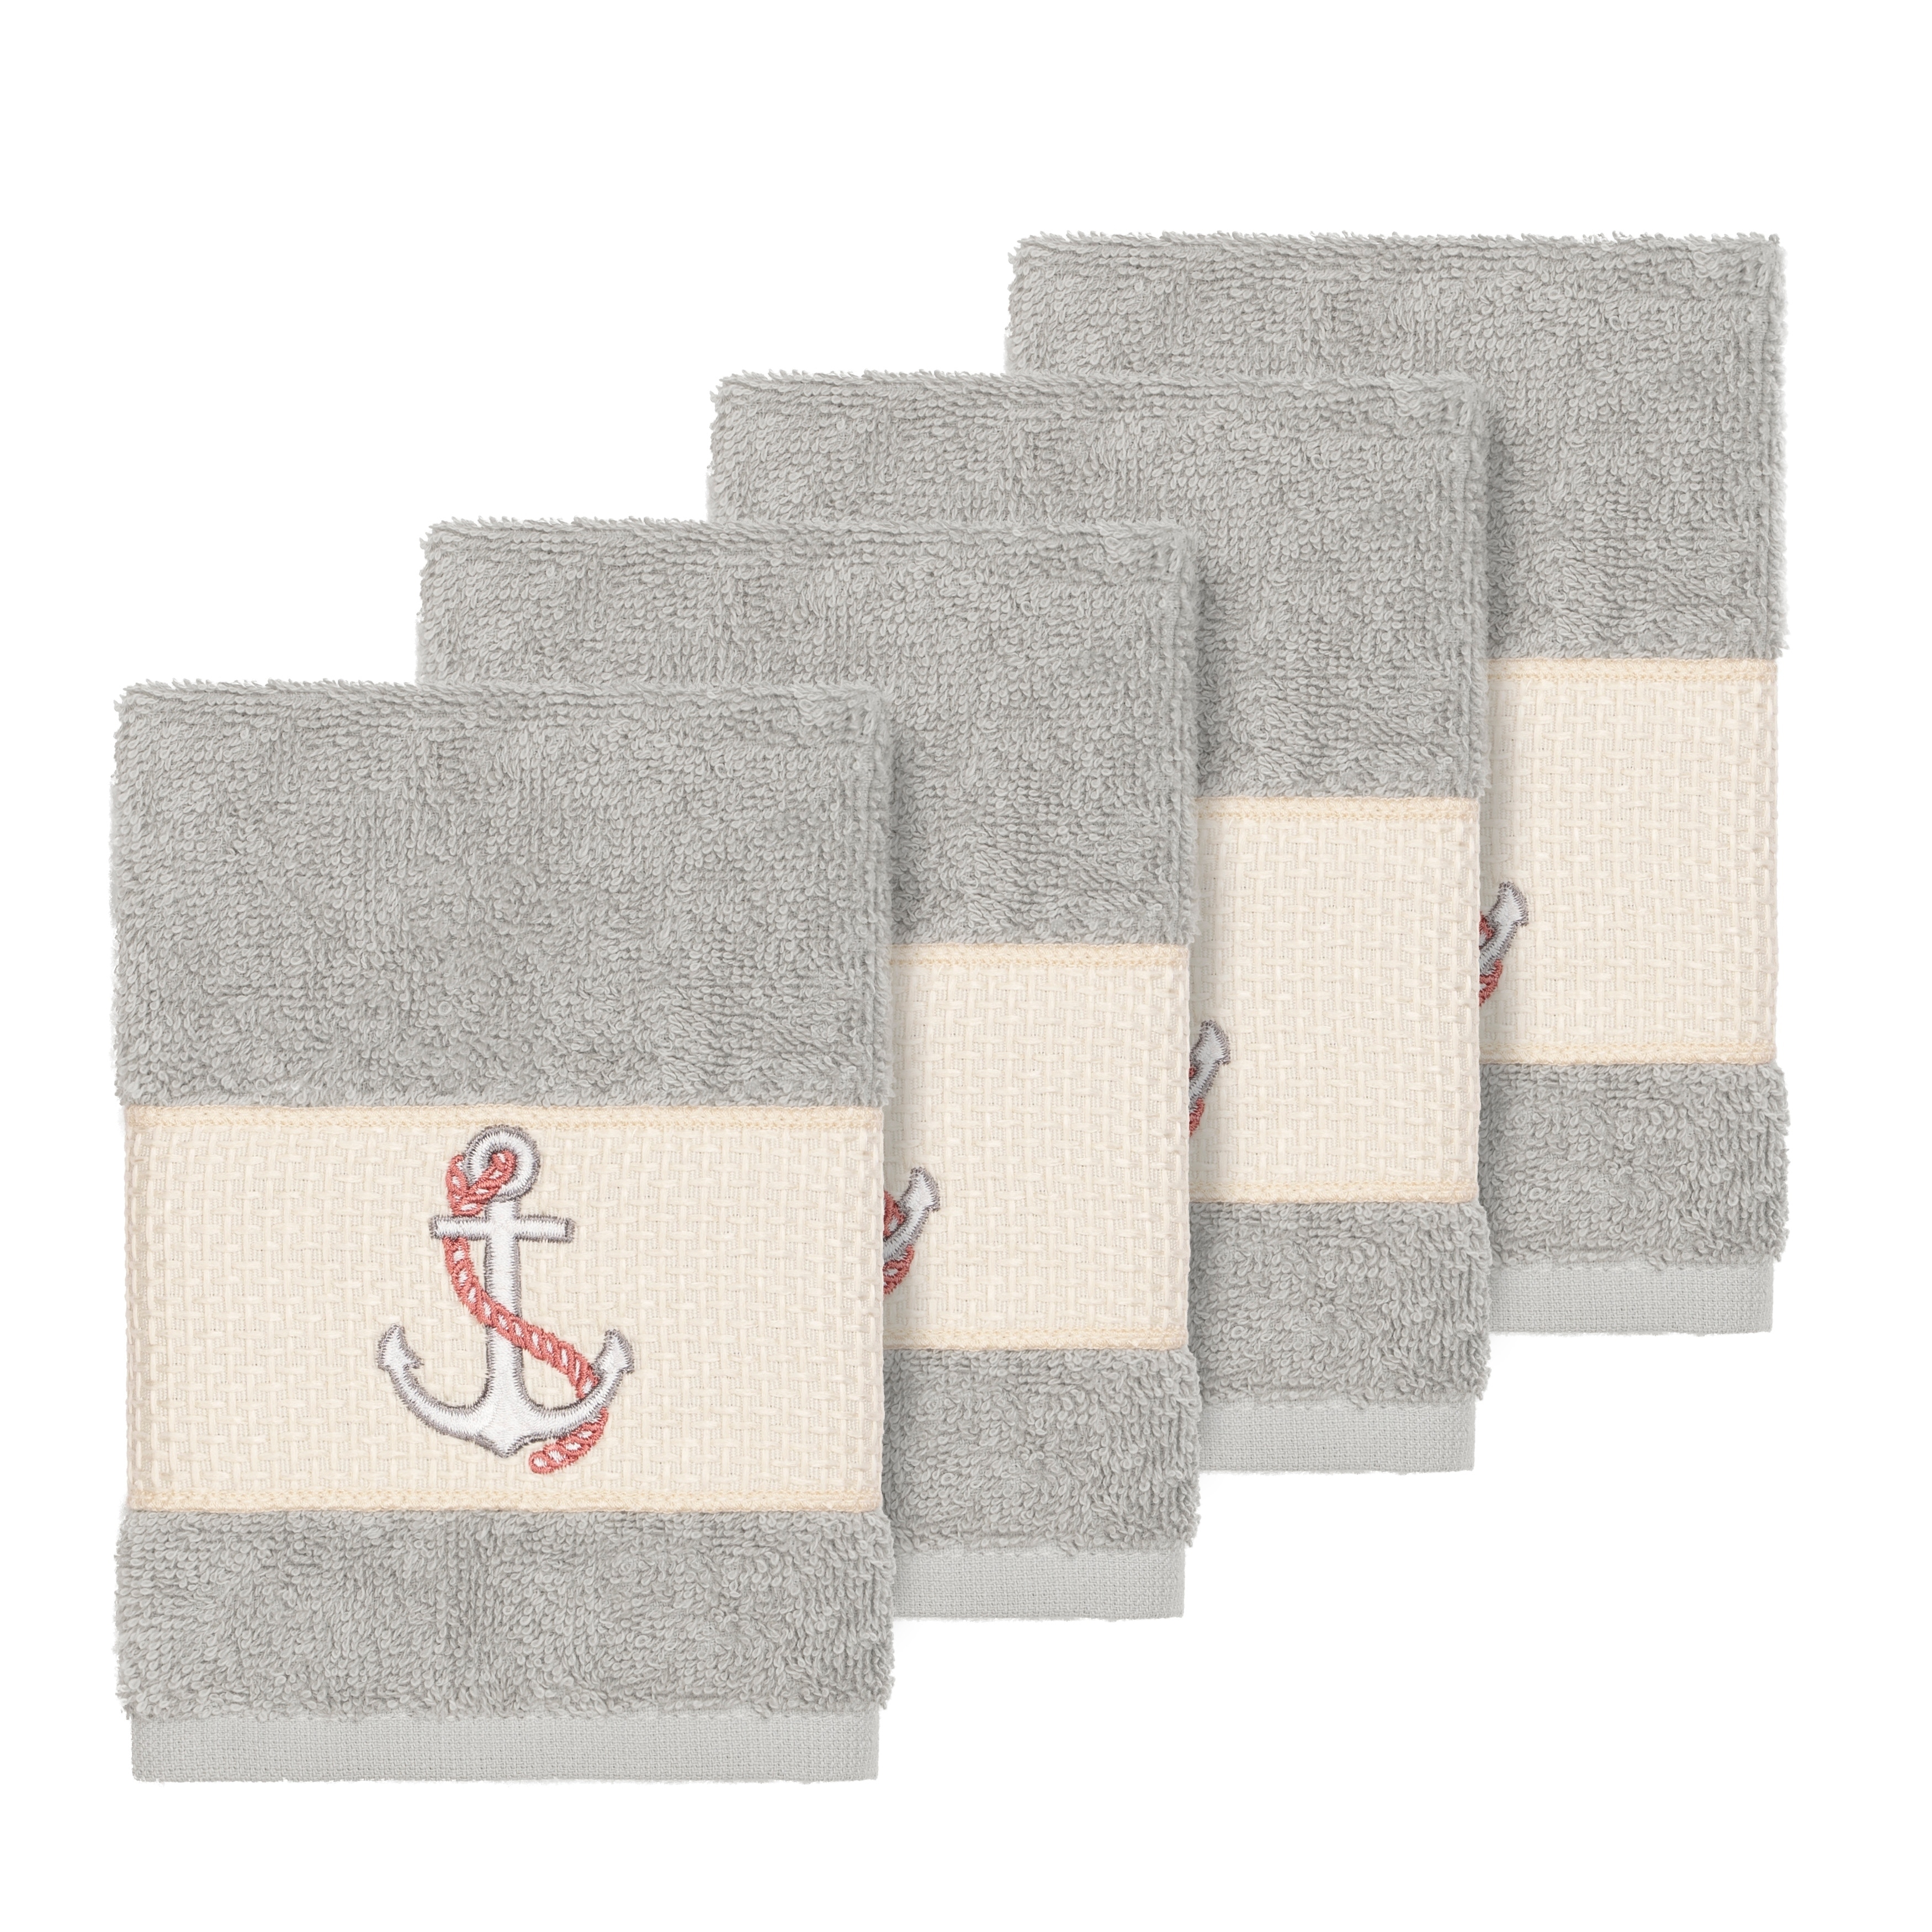 https://ak1.ostkcdn.com/images/products/22355596/Authentic-Hotel-and-Spa-Turkish-Cotton-Nautical-Embroidered-Light-Grey-4-piece-Washcloth-Set-545b0cd5-6fa0-4fed-8b99-23fc5157fd8e.jpg